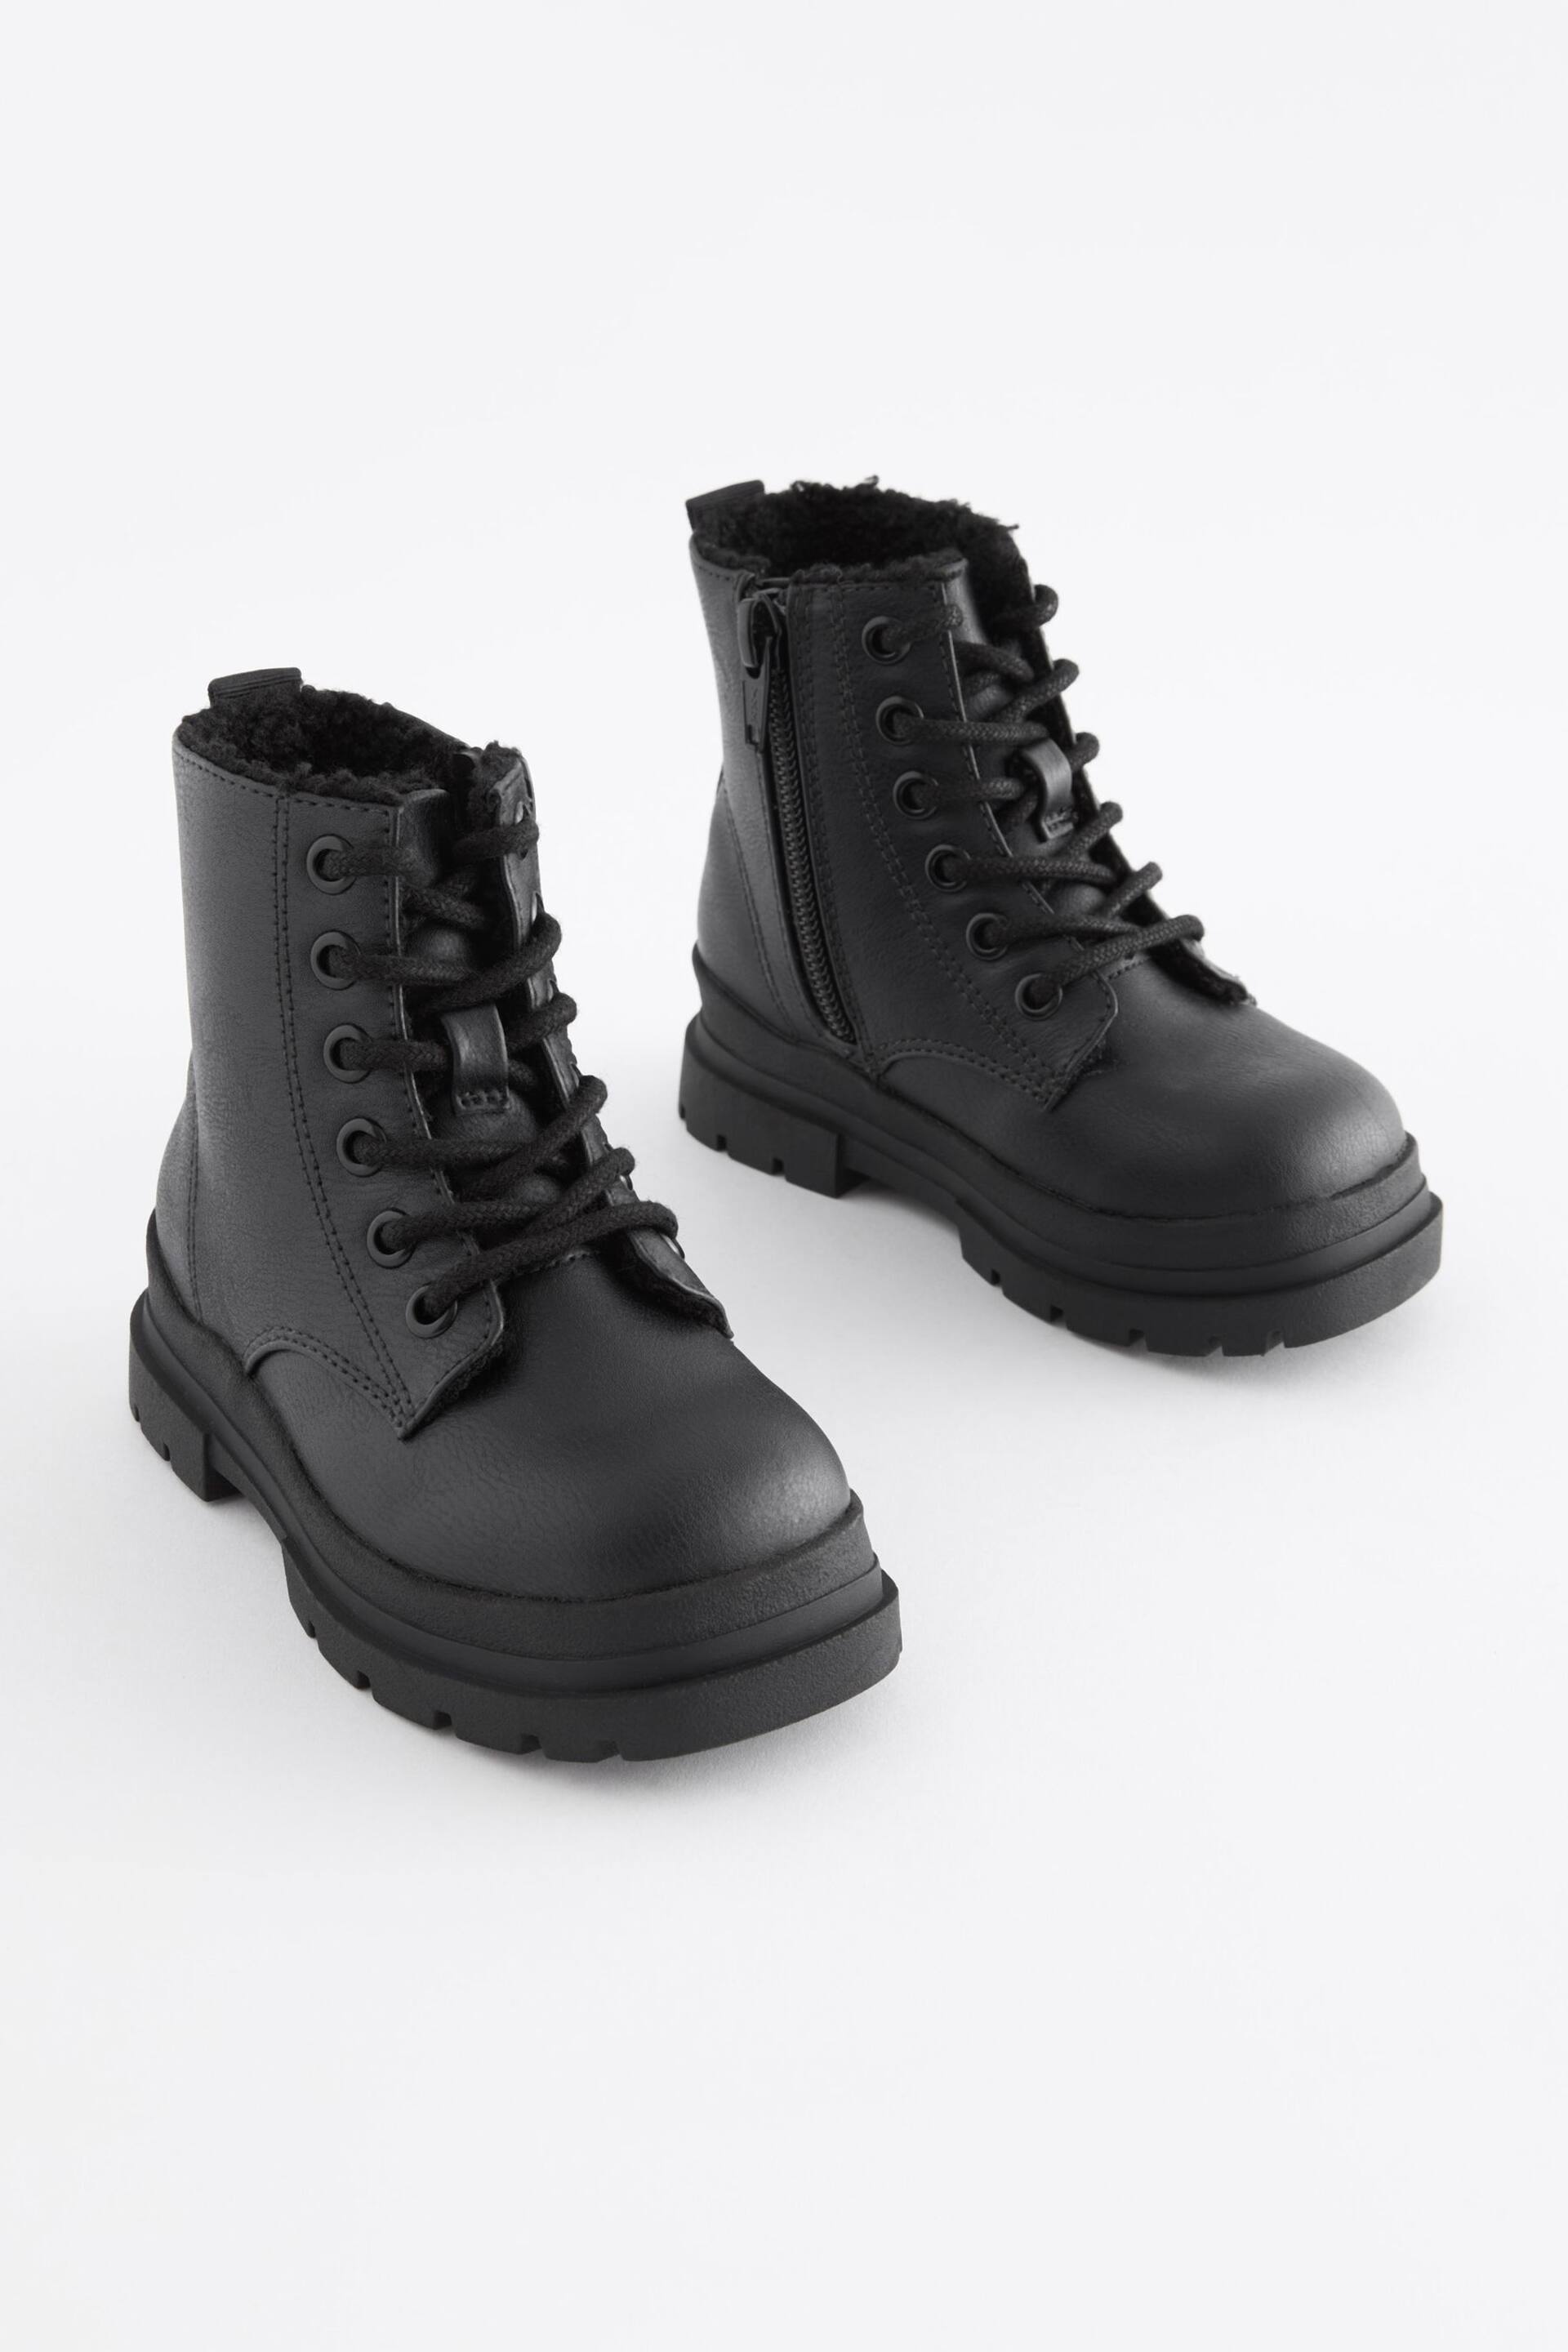 Black Warm Lined Lace-Up Boots - Image 1 of 5